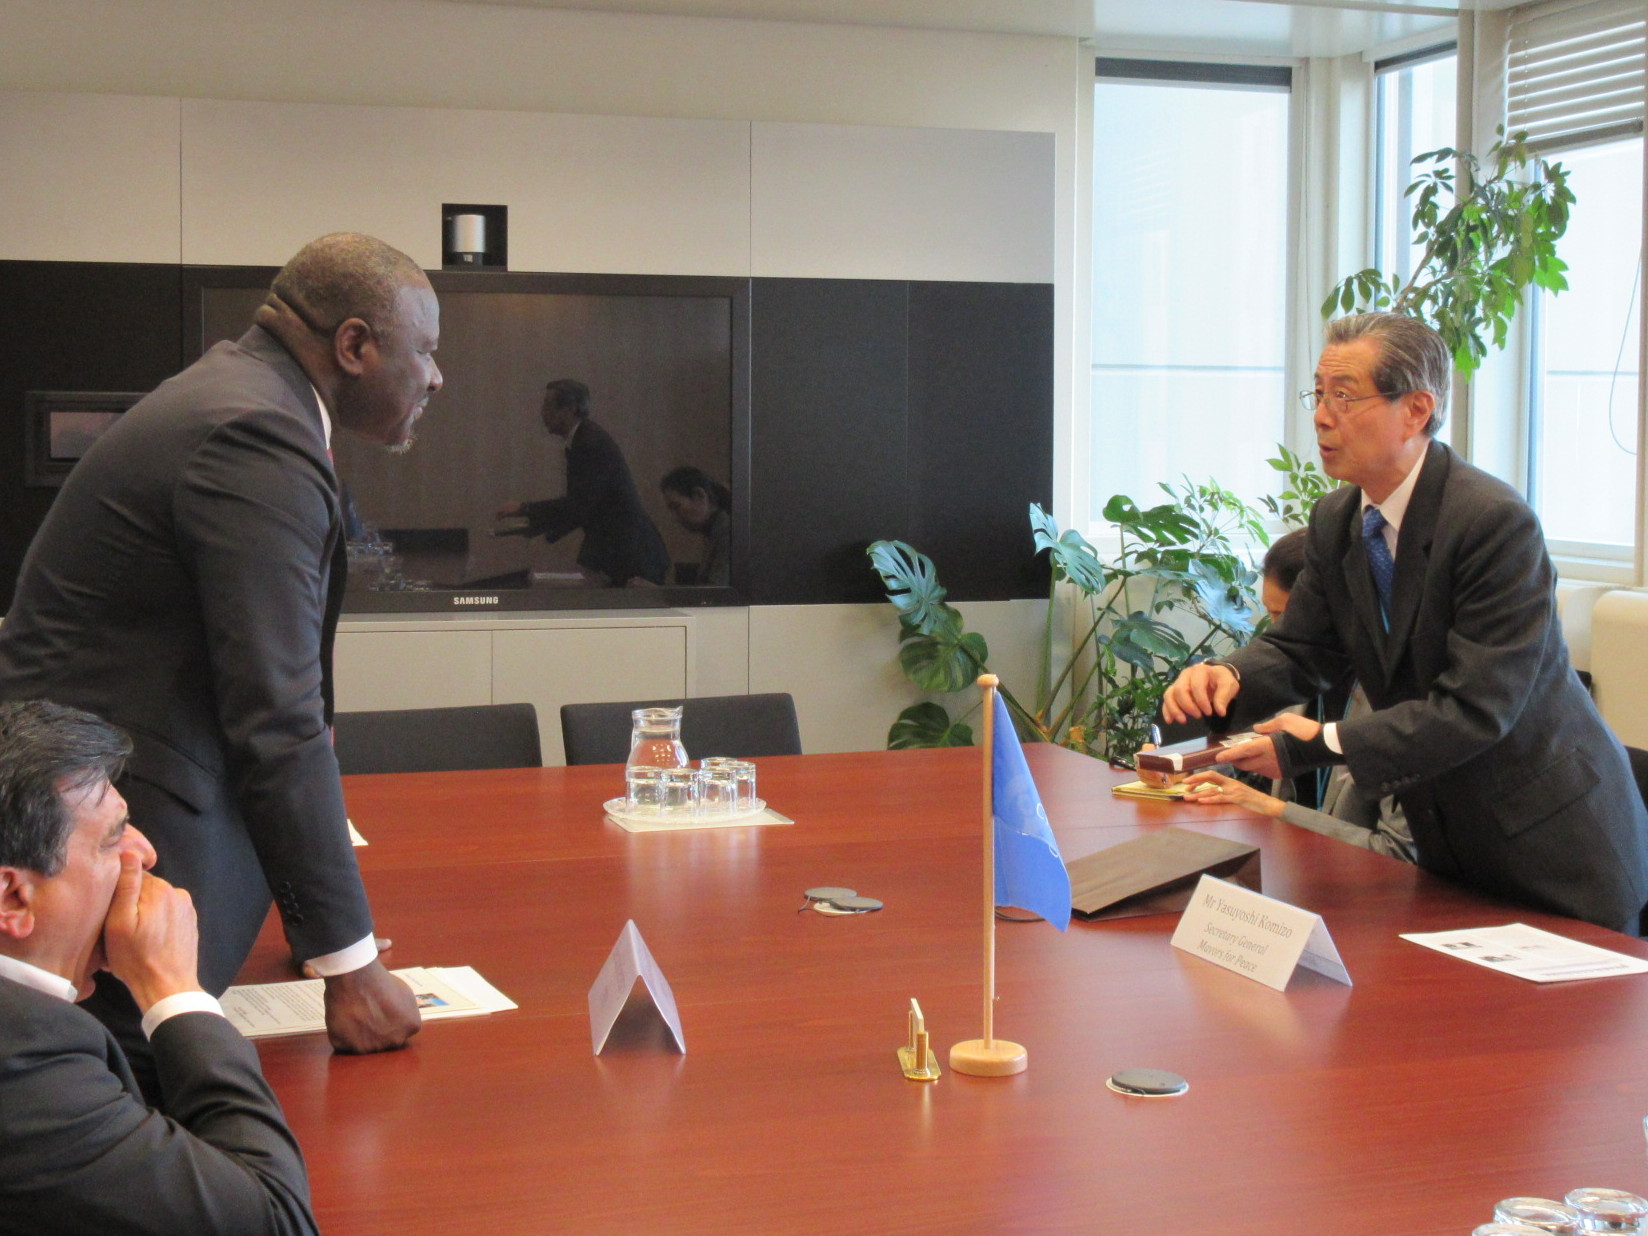 Meeting with Dr. Lassina Zerbo